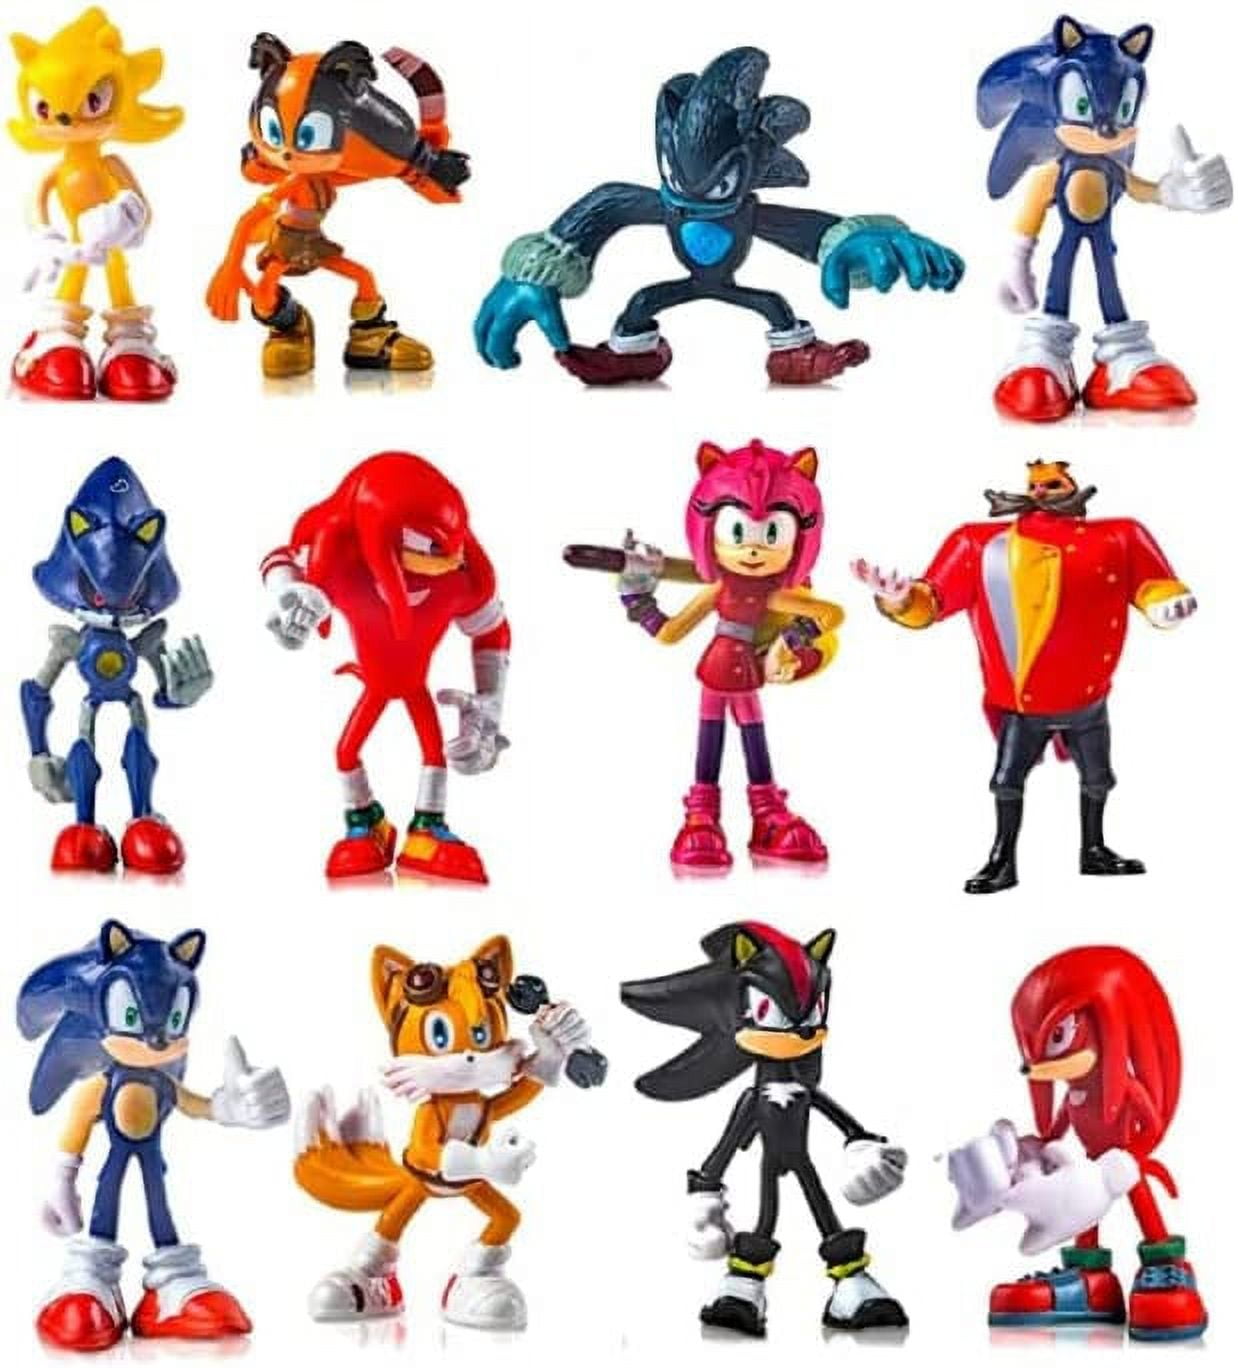 J&G Sonic the Hedgehog Toys Action Figures 2.5 inch, Pack of 12 ...